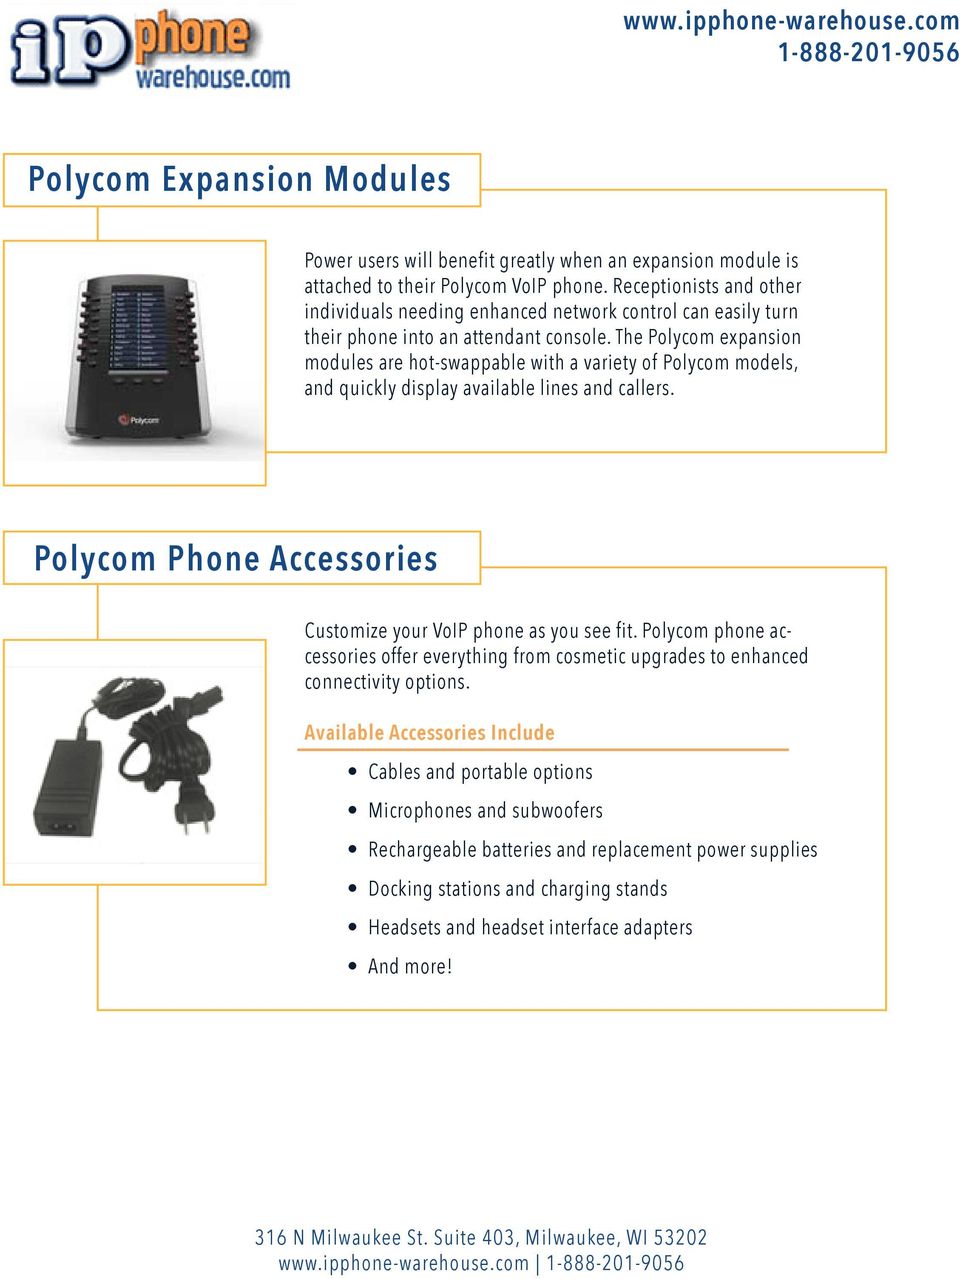 The Polycom expansion modules are hot-swappable with a variety of Polycom models, and quickly display available lines and callers.